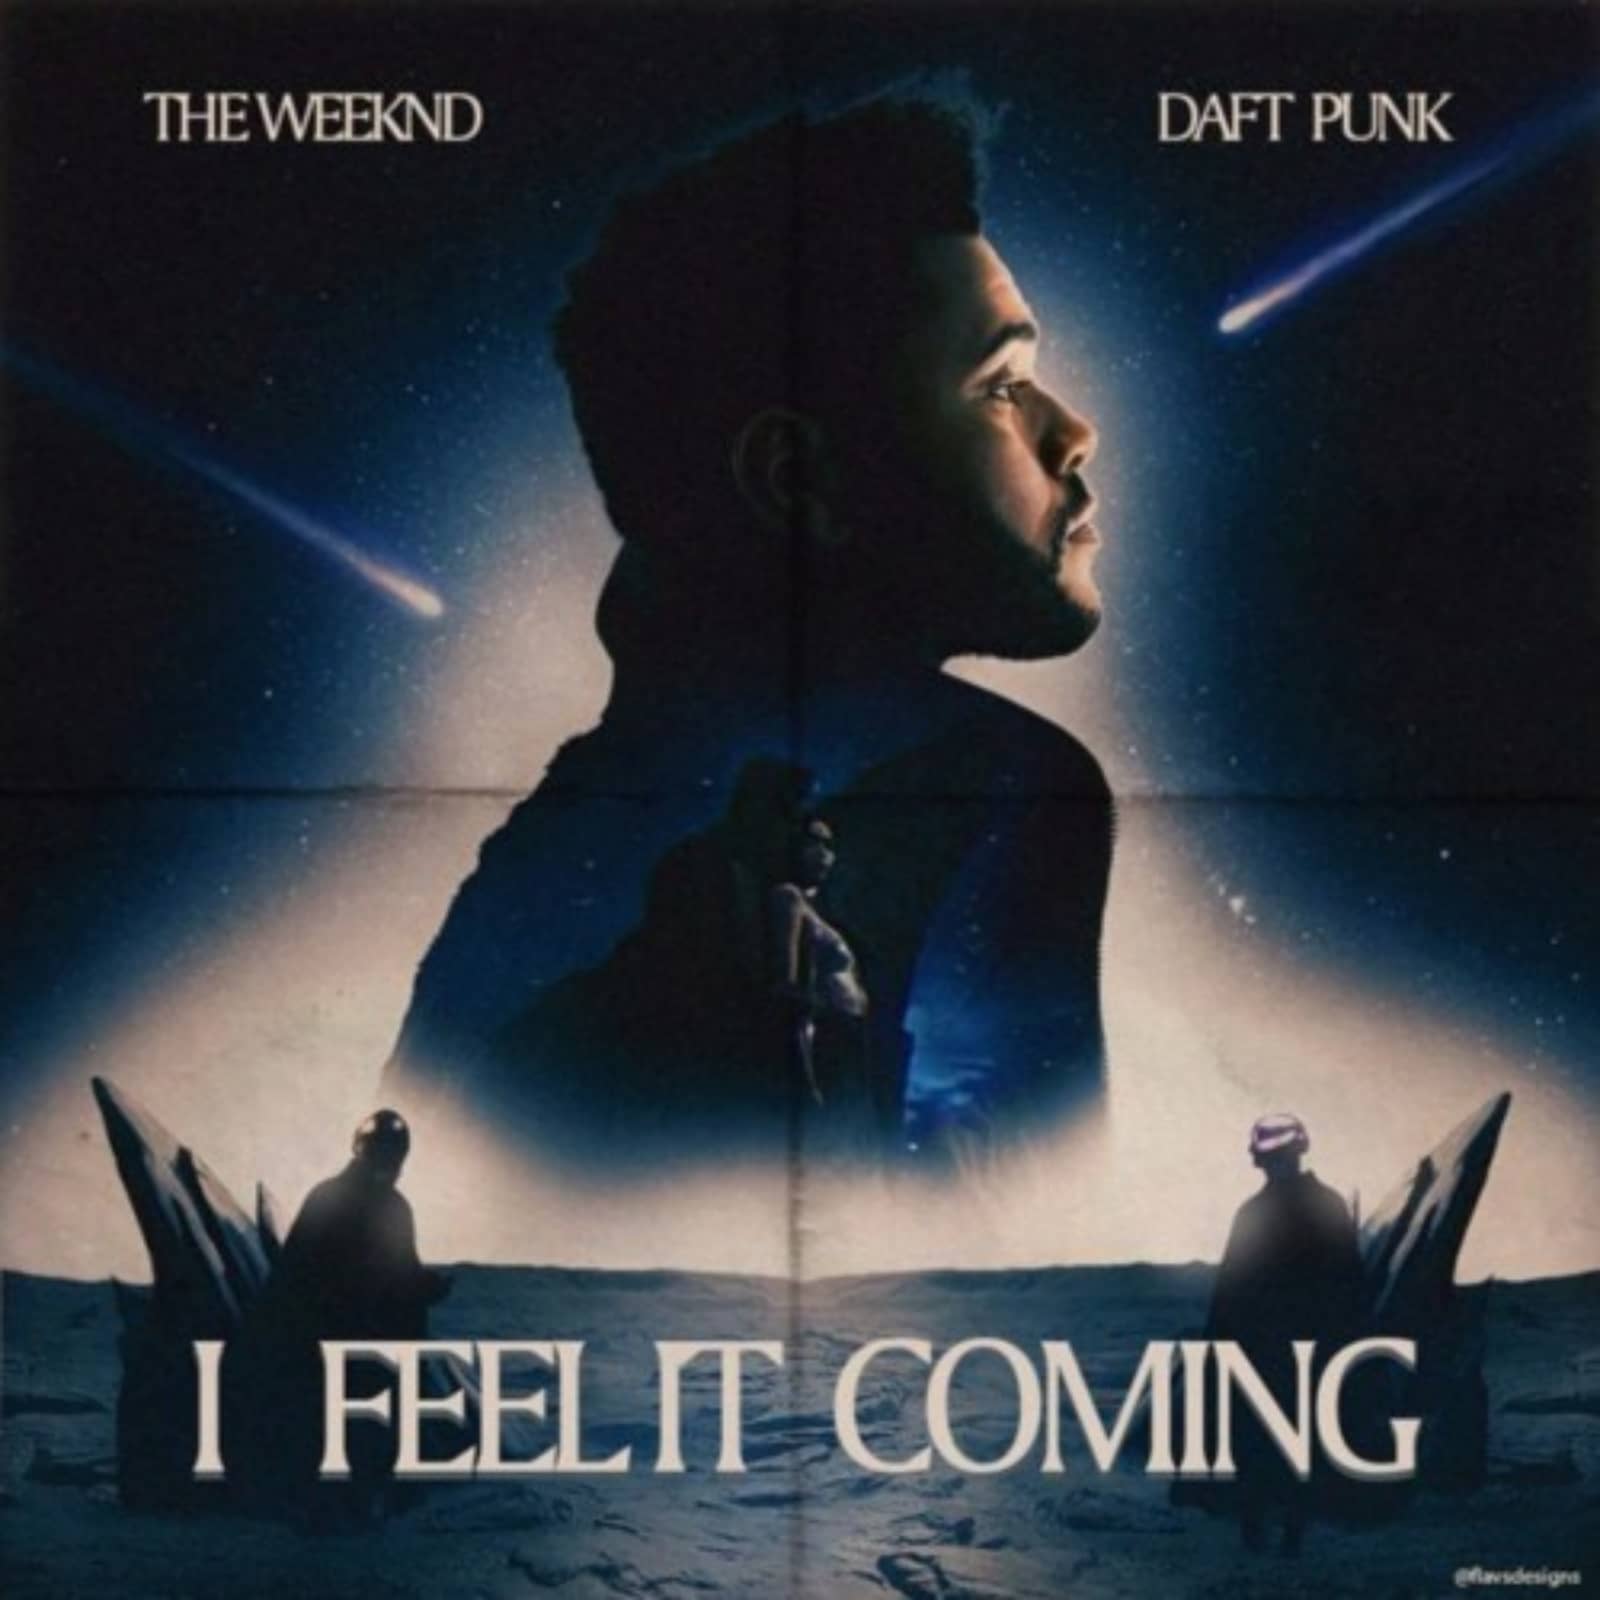 Feeling coming in the air. I feel it coming the Weeknd. The Weeknd Daft Punk i feel it coming. The weekend Daft Punk. Weeknd feel it coming.